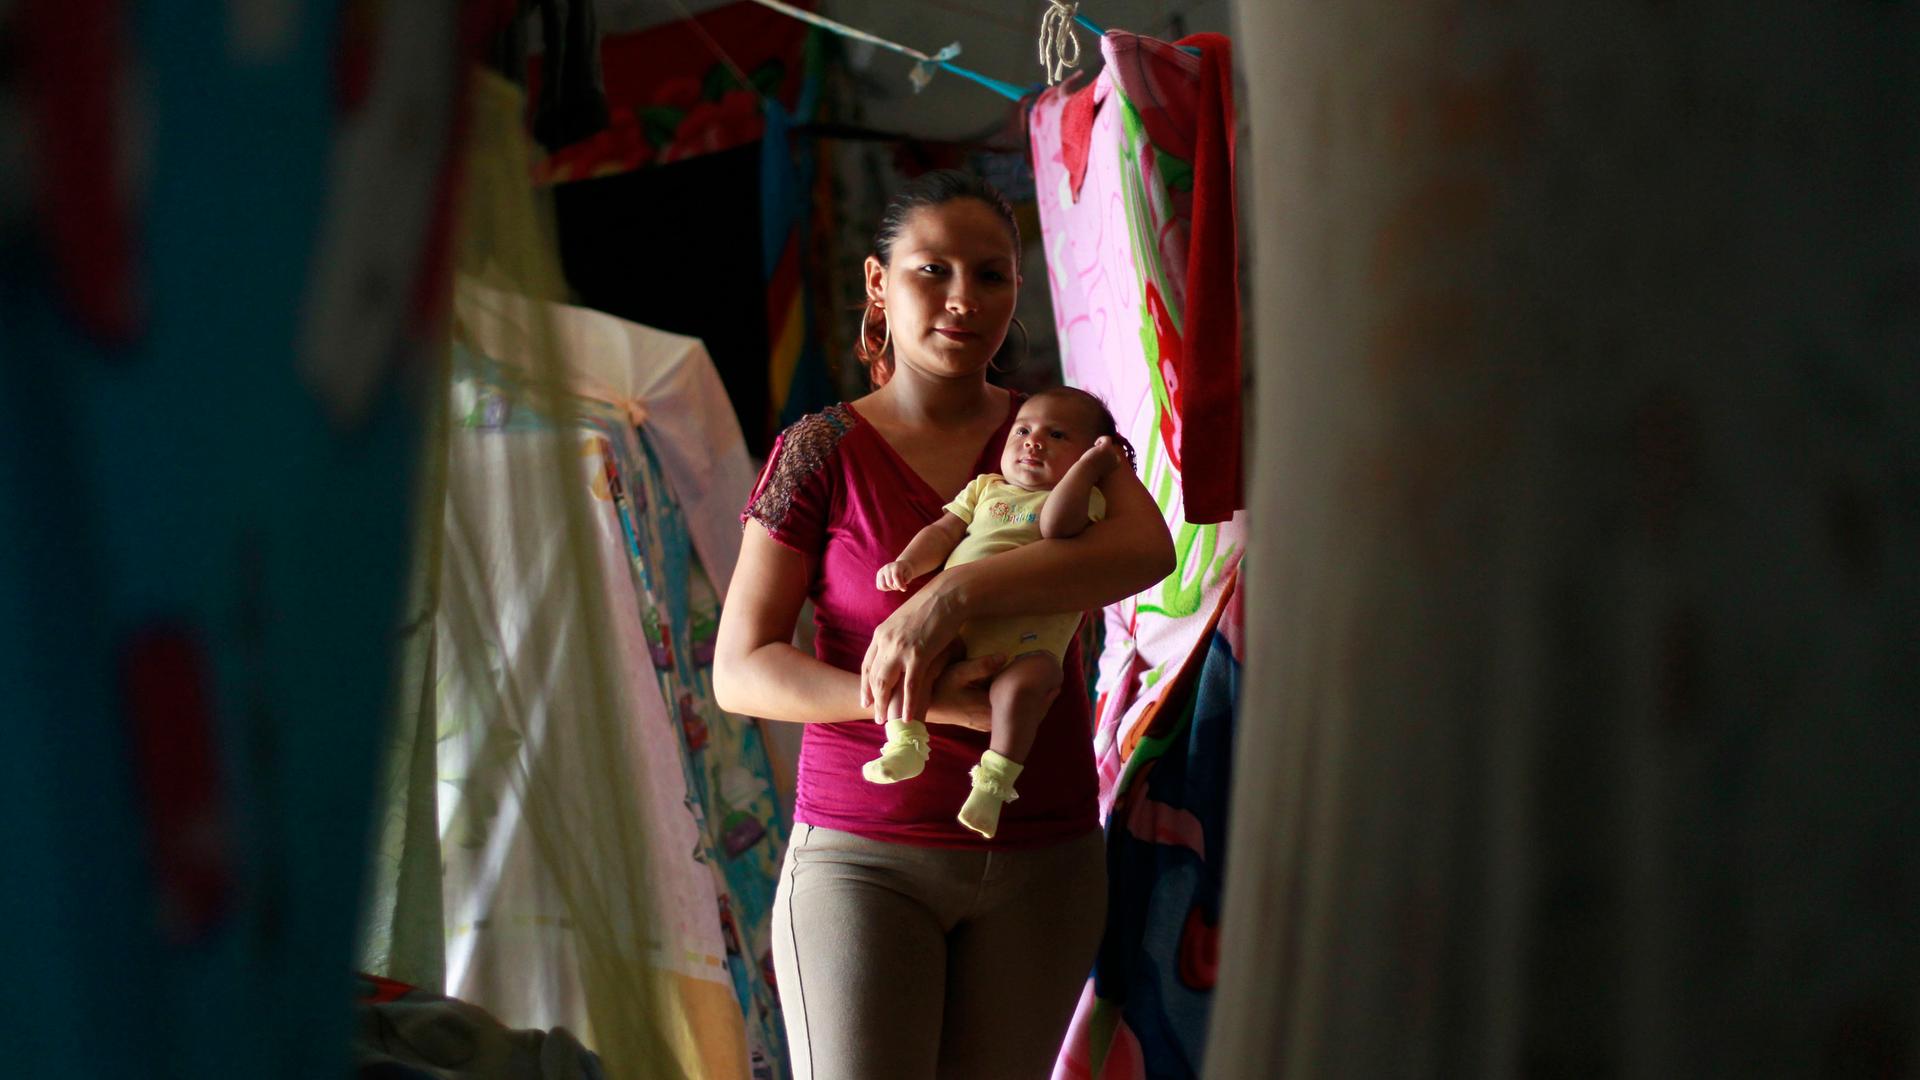 a female prisoner holds her baby in a room with laundry hanging 